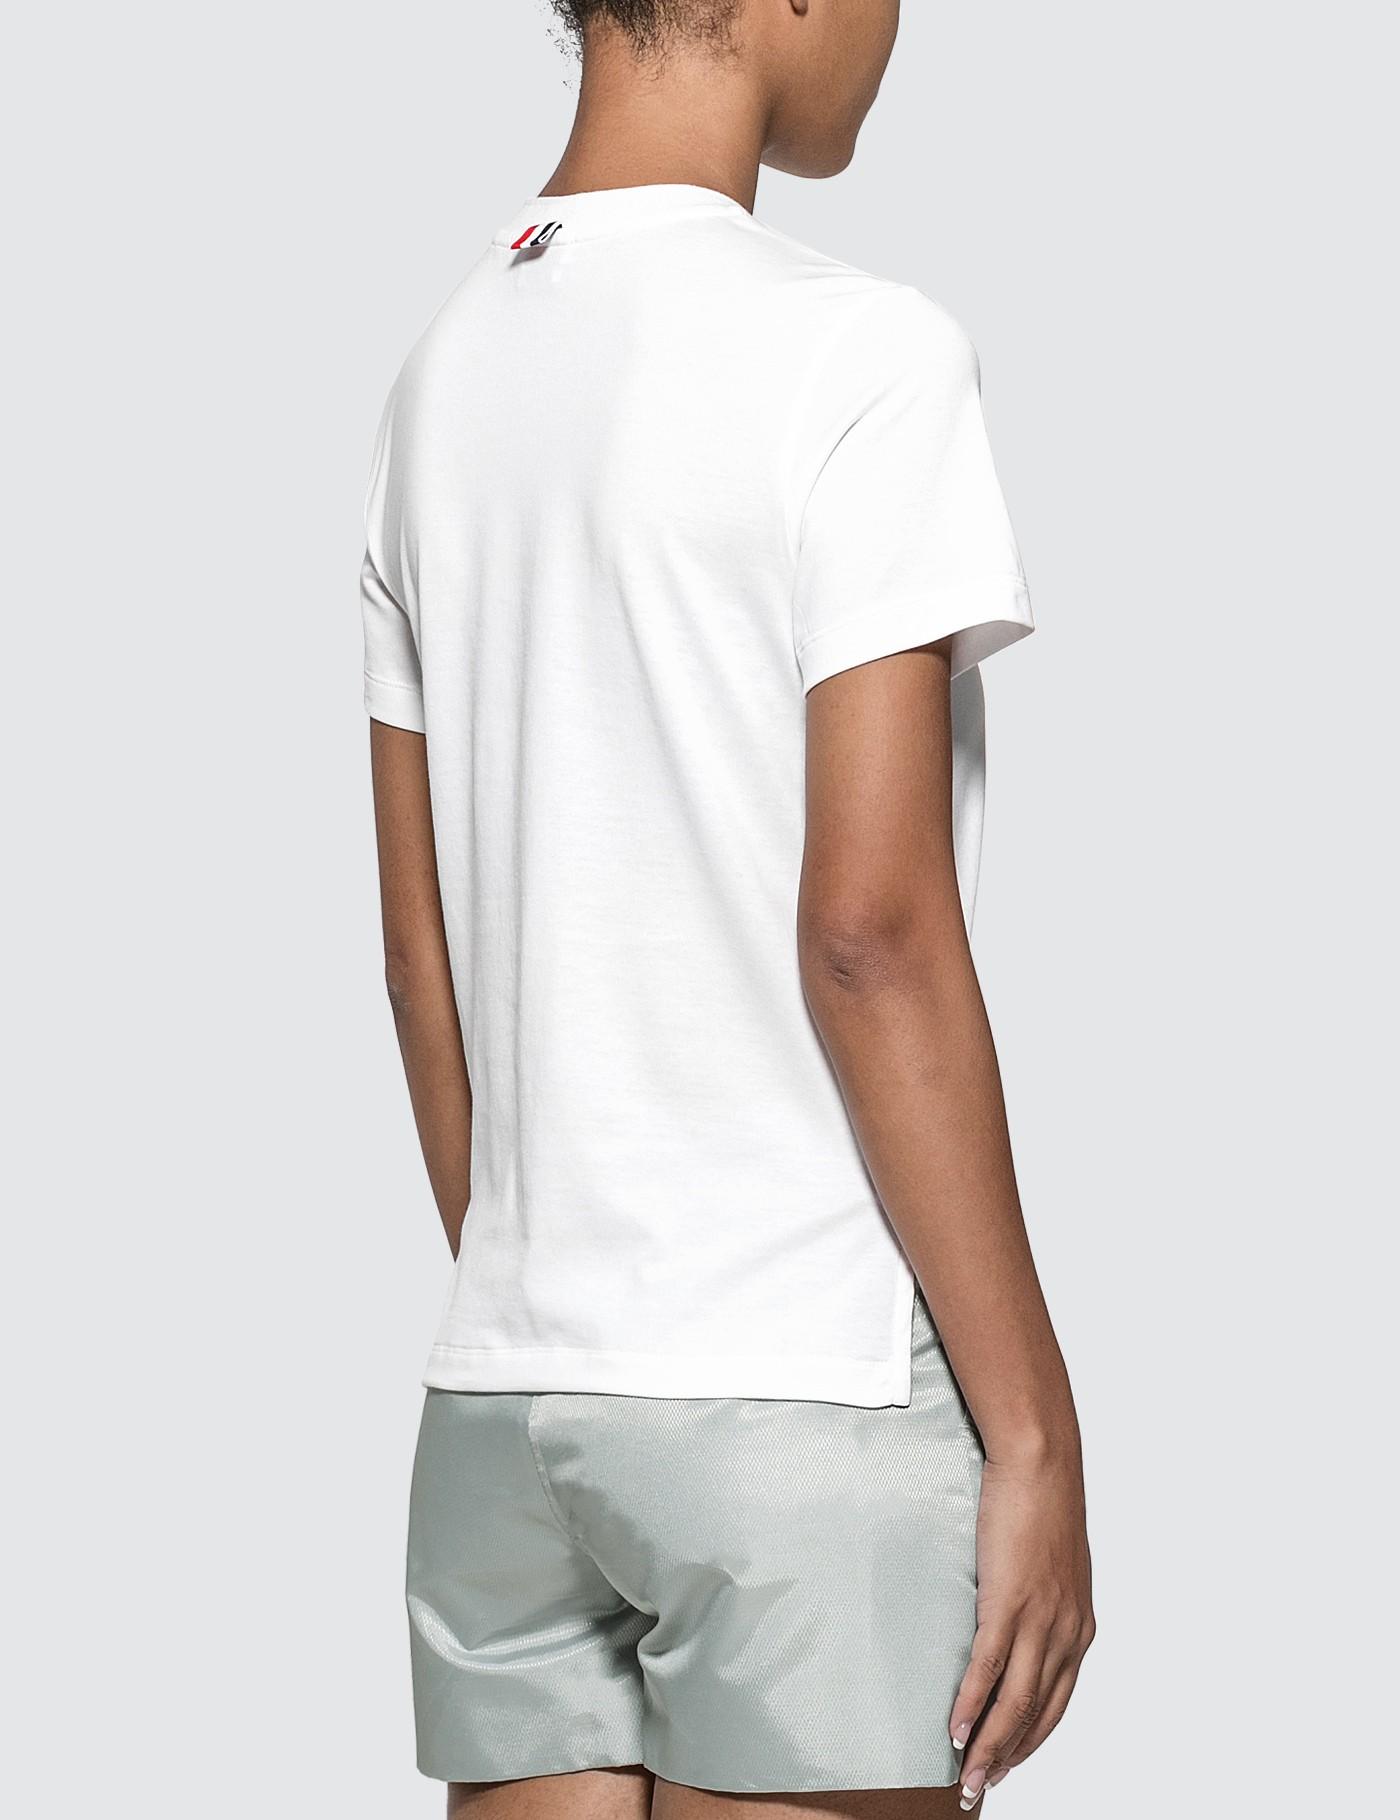 Thom Browne Cotton Relaxed Fit T-shirt in White - Lyst